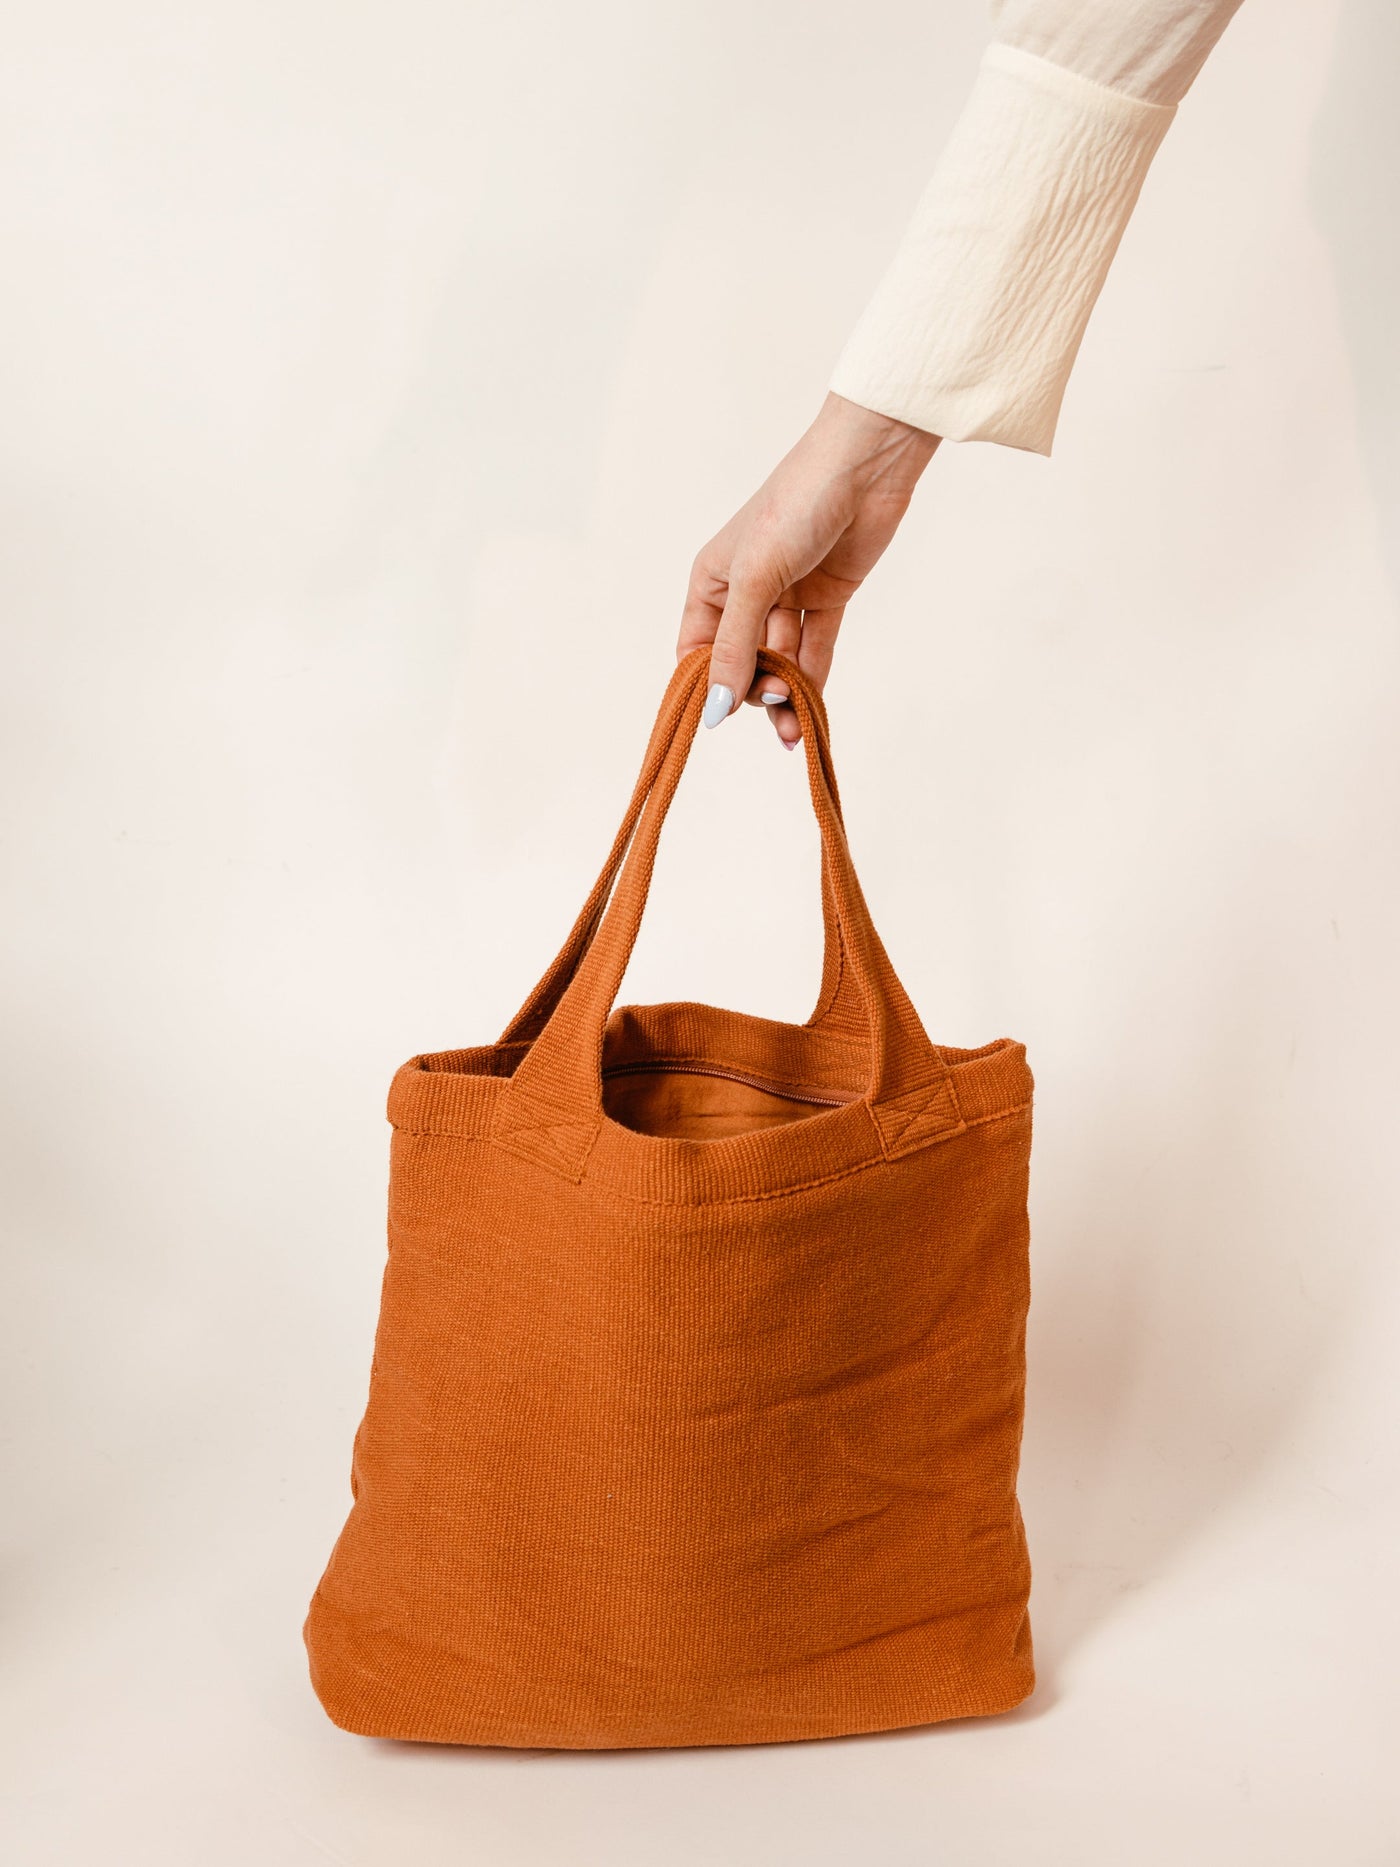 Zipped Picnic Tote - Two Colors